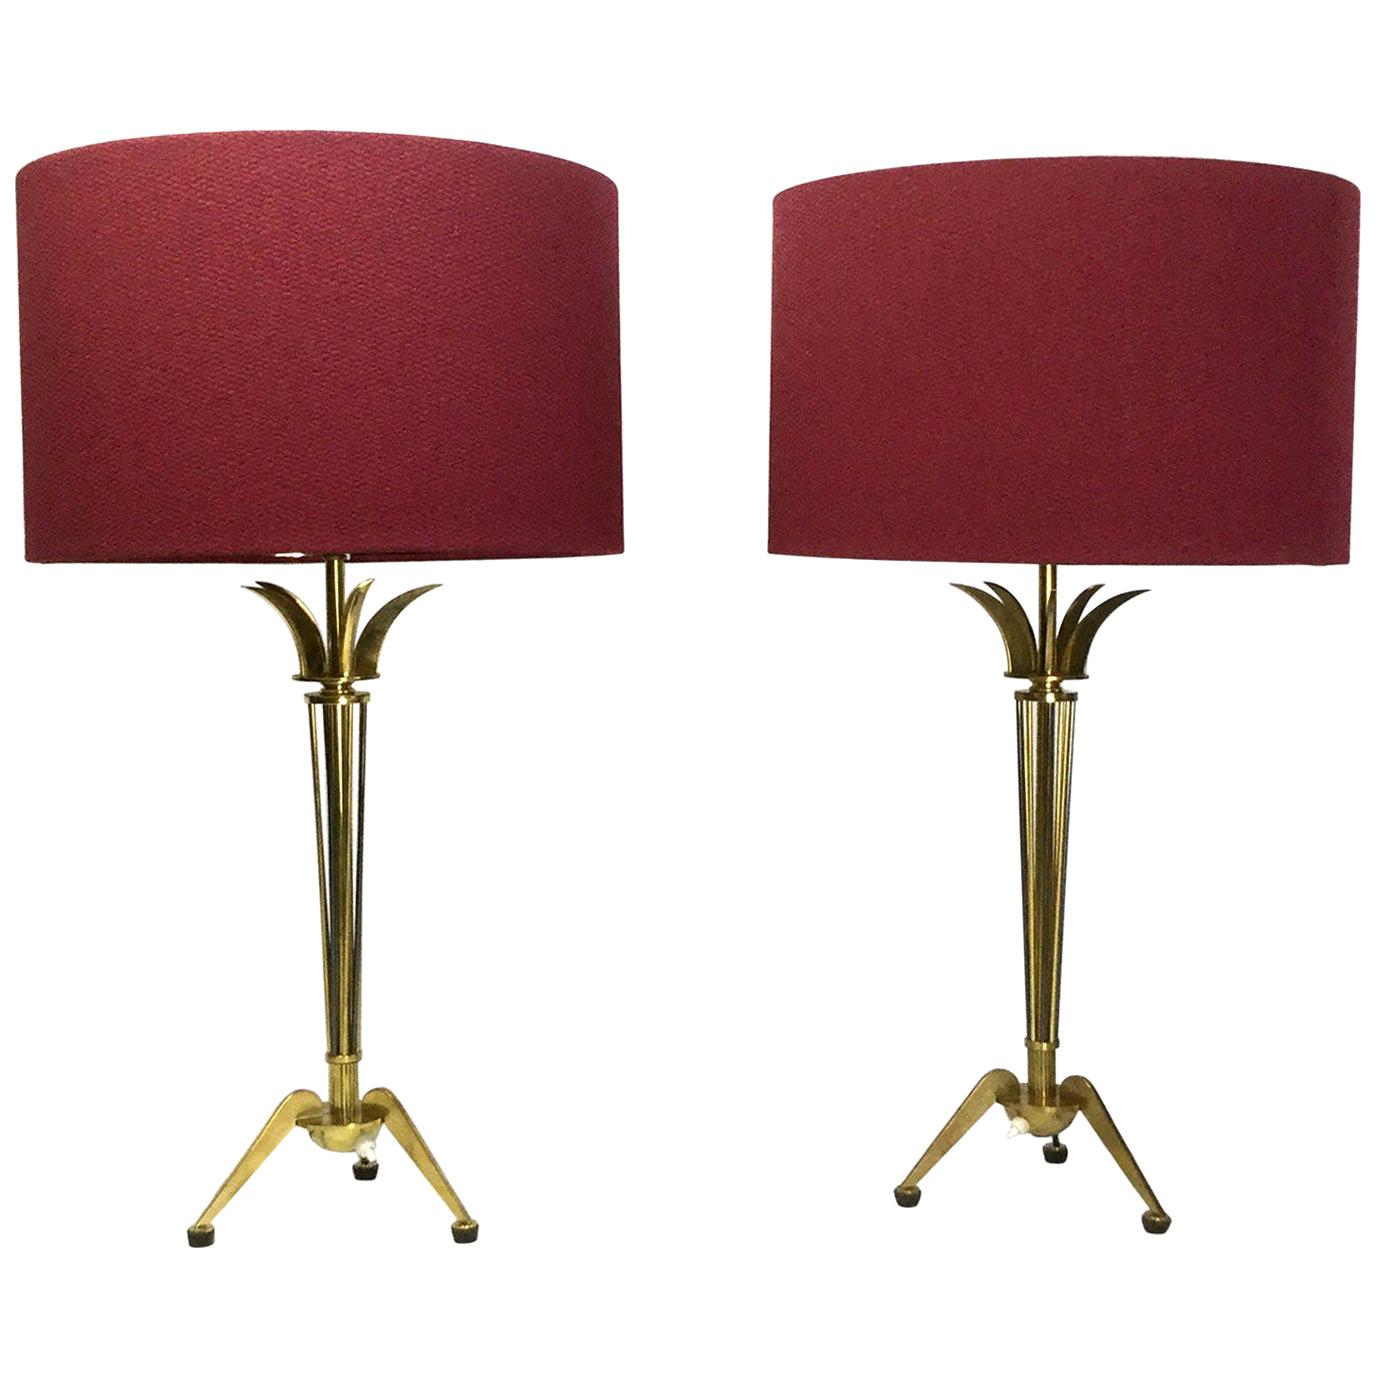 Pair of Brass Table Lamps by Maison Arlus for Maison Jansen, France, 1950s For Sale